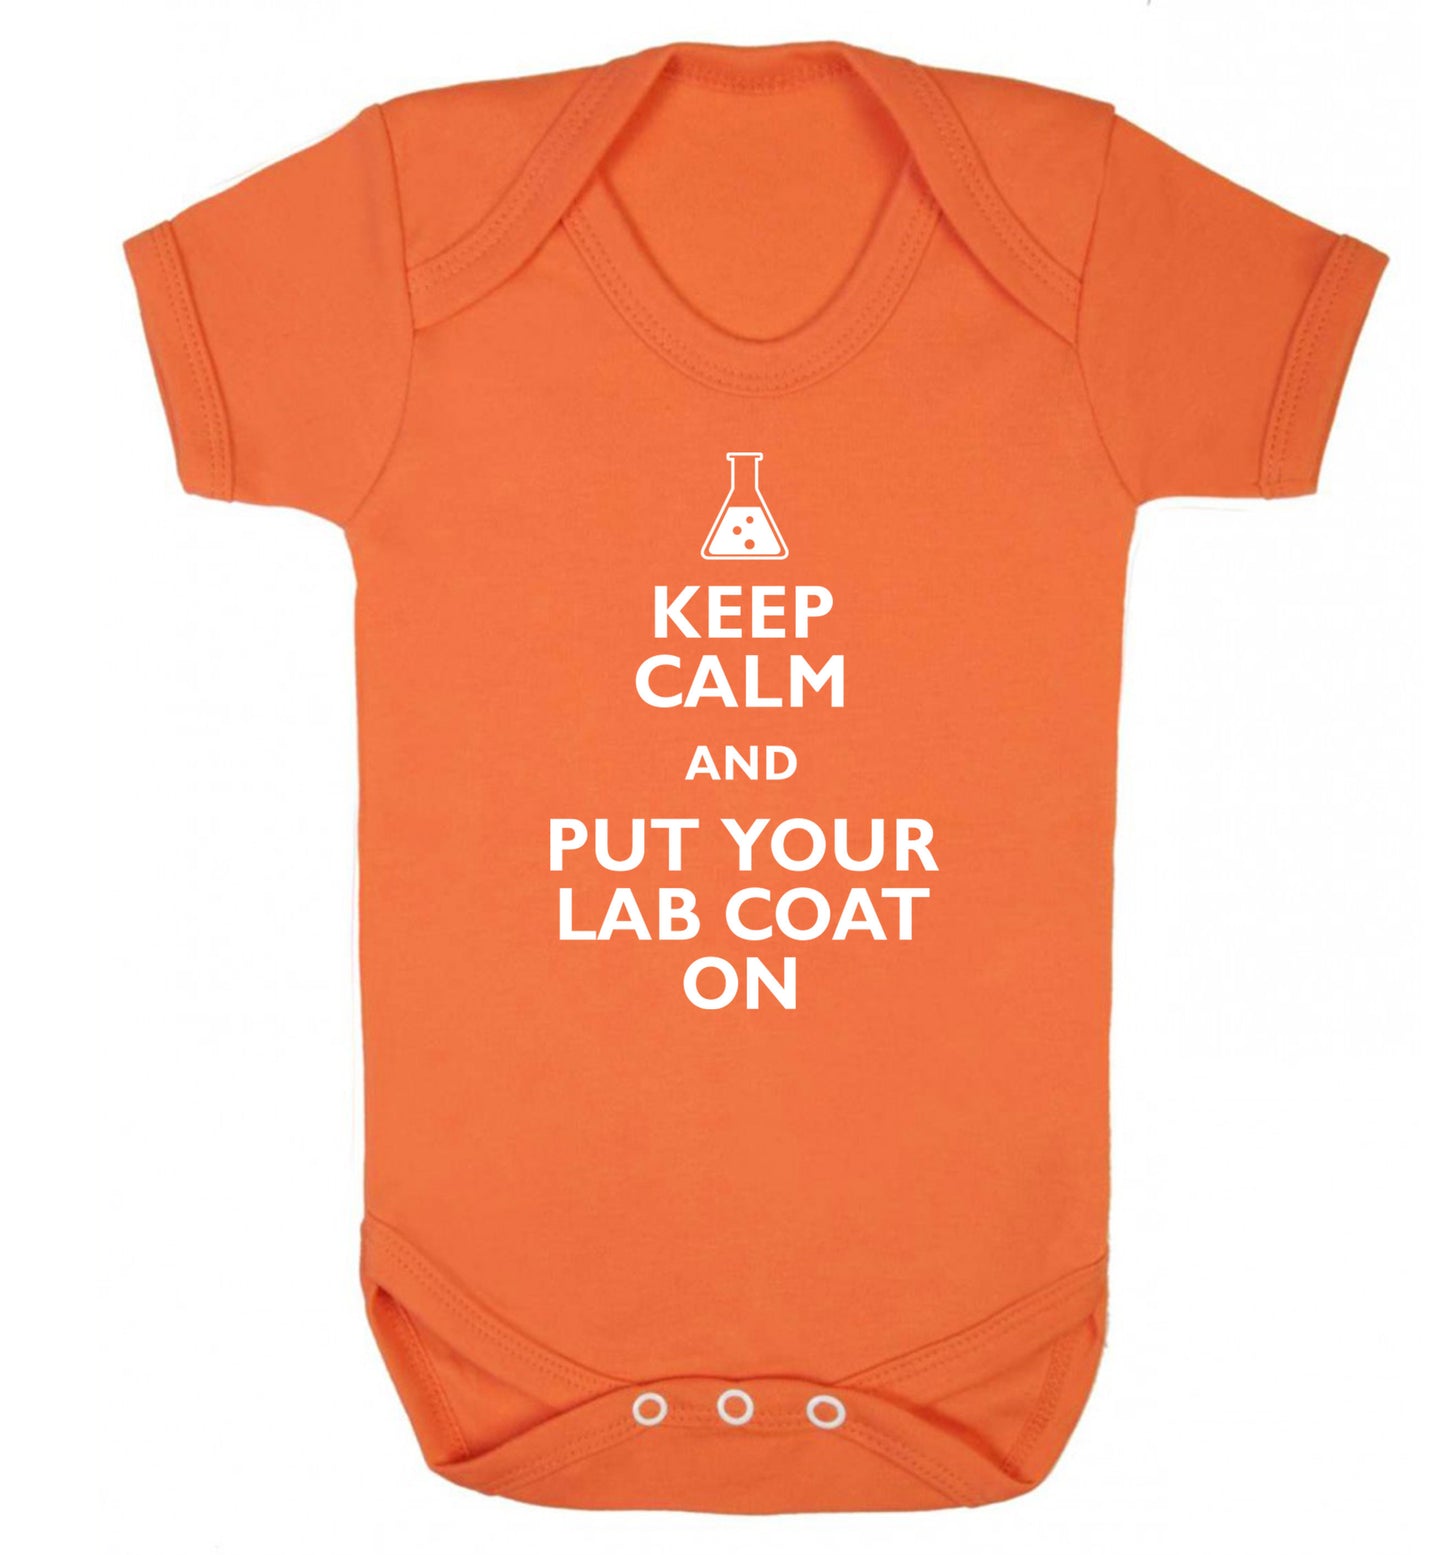 Keep calm and put your lab coat on Baby Vest orange 18-24 months